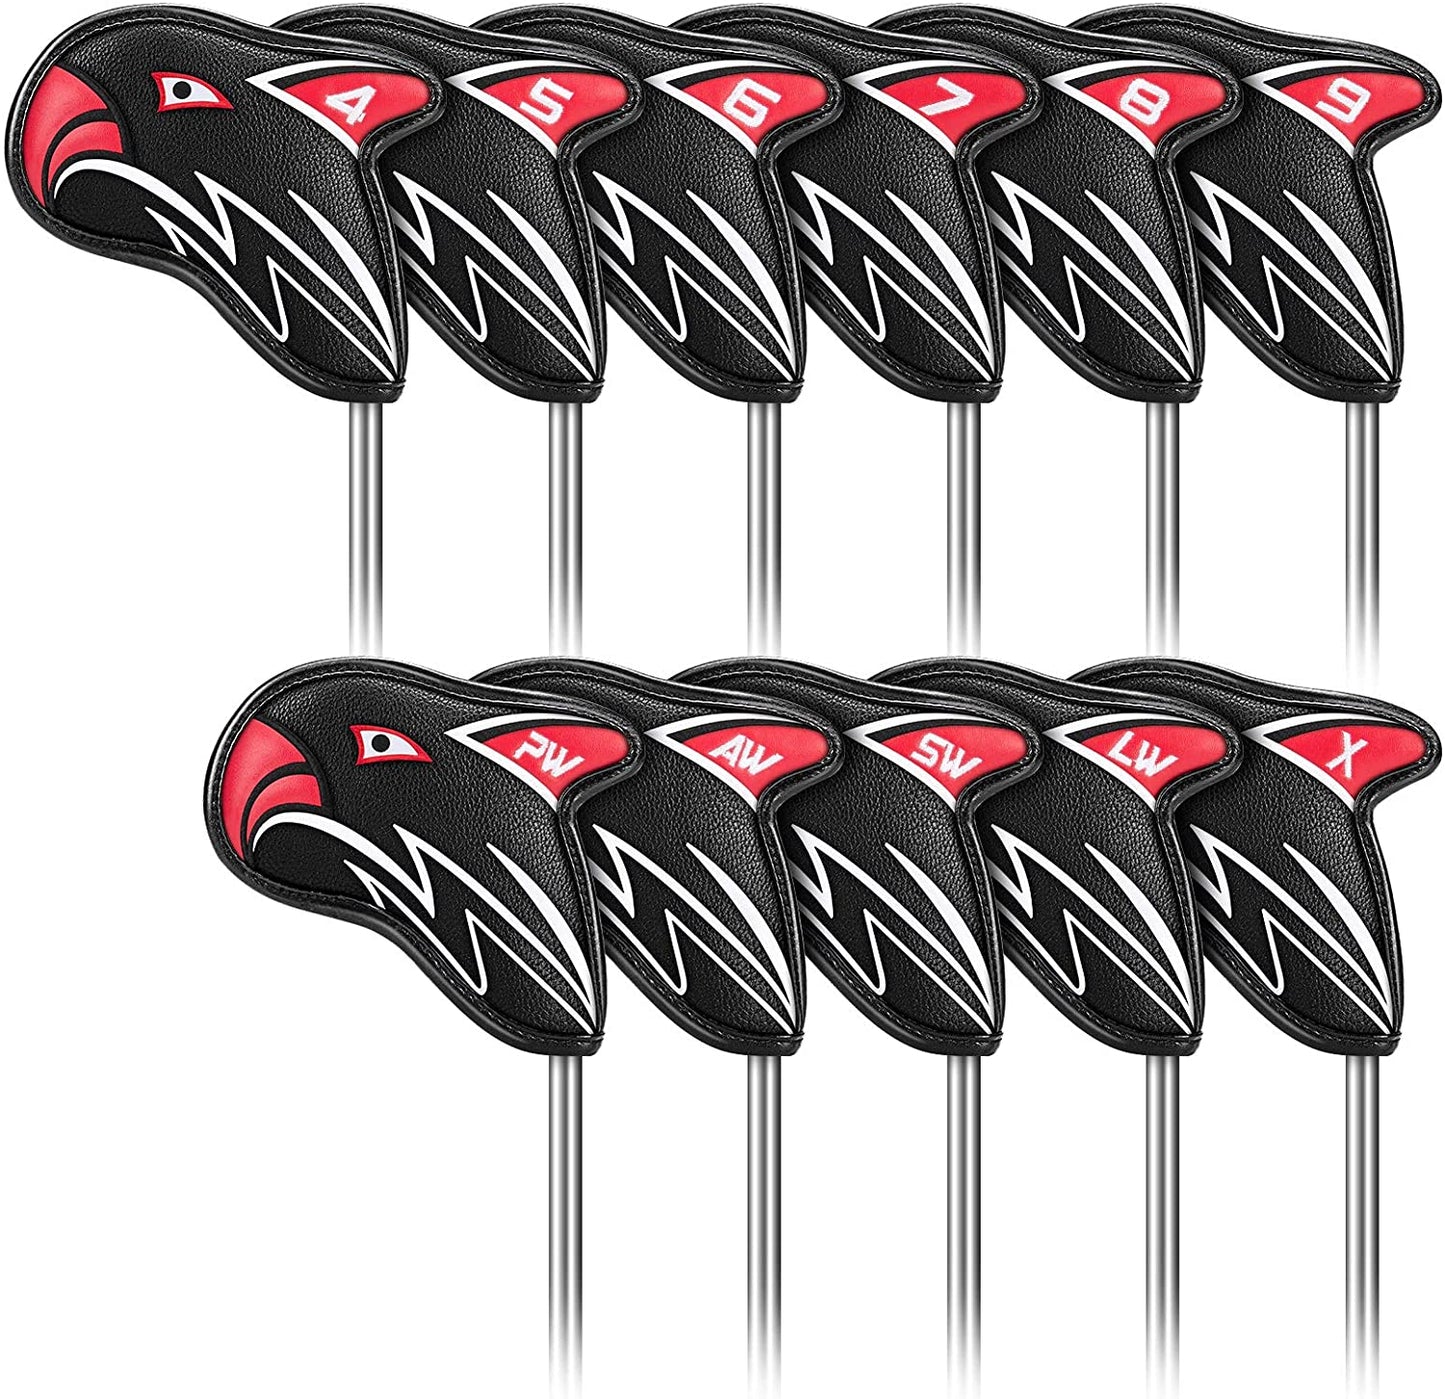 Golf Iron Head Covers 11pcs Thicken Eagle PU Leather Soft Black Embroideried Edging Closely Protector Right Handed Waterproof Durable Fit Most Clubs Wedge （4-9 Pw Aw Sw Lw X） Number